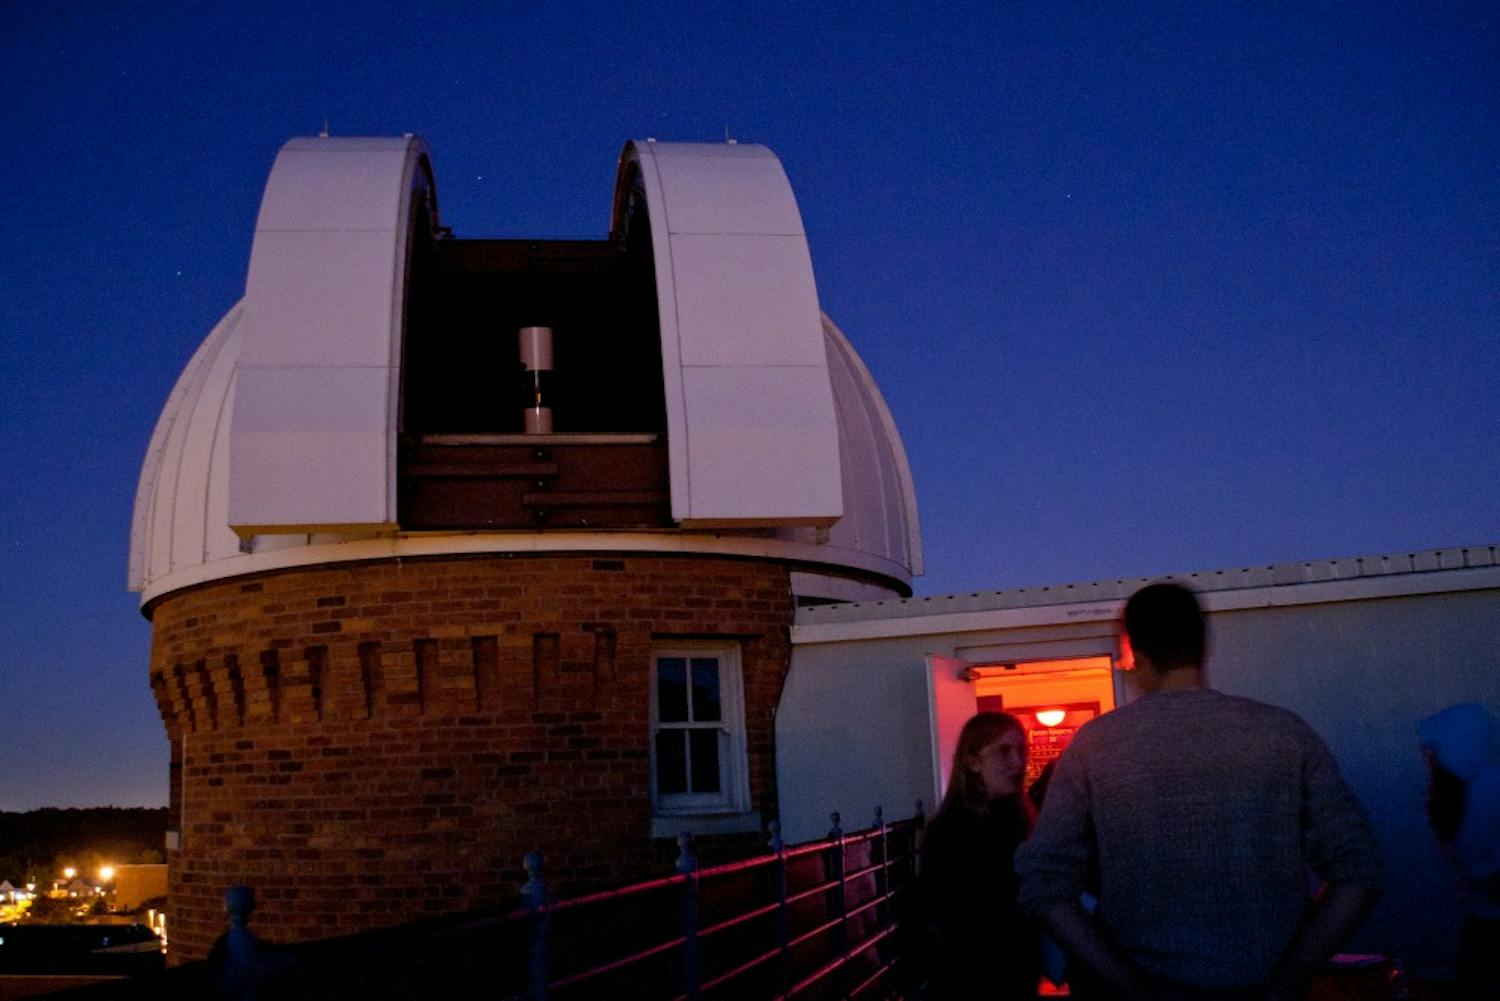 Eastern Michigan University’s Astronomy Club meets at 7:30 p.m. every Thursday in 402 Sherzer Observatory. Meetings are always free and activities range from stargazing and observing nebula rings to watching astronomy-themed movies such as “The Hitchhiker’s Guide to the Galaxy.”